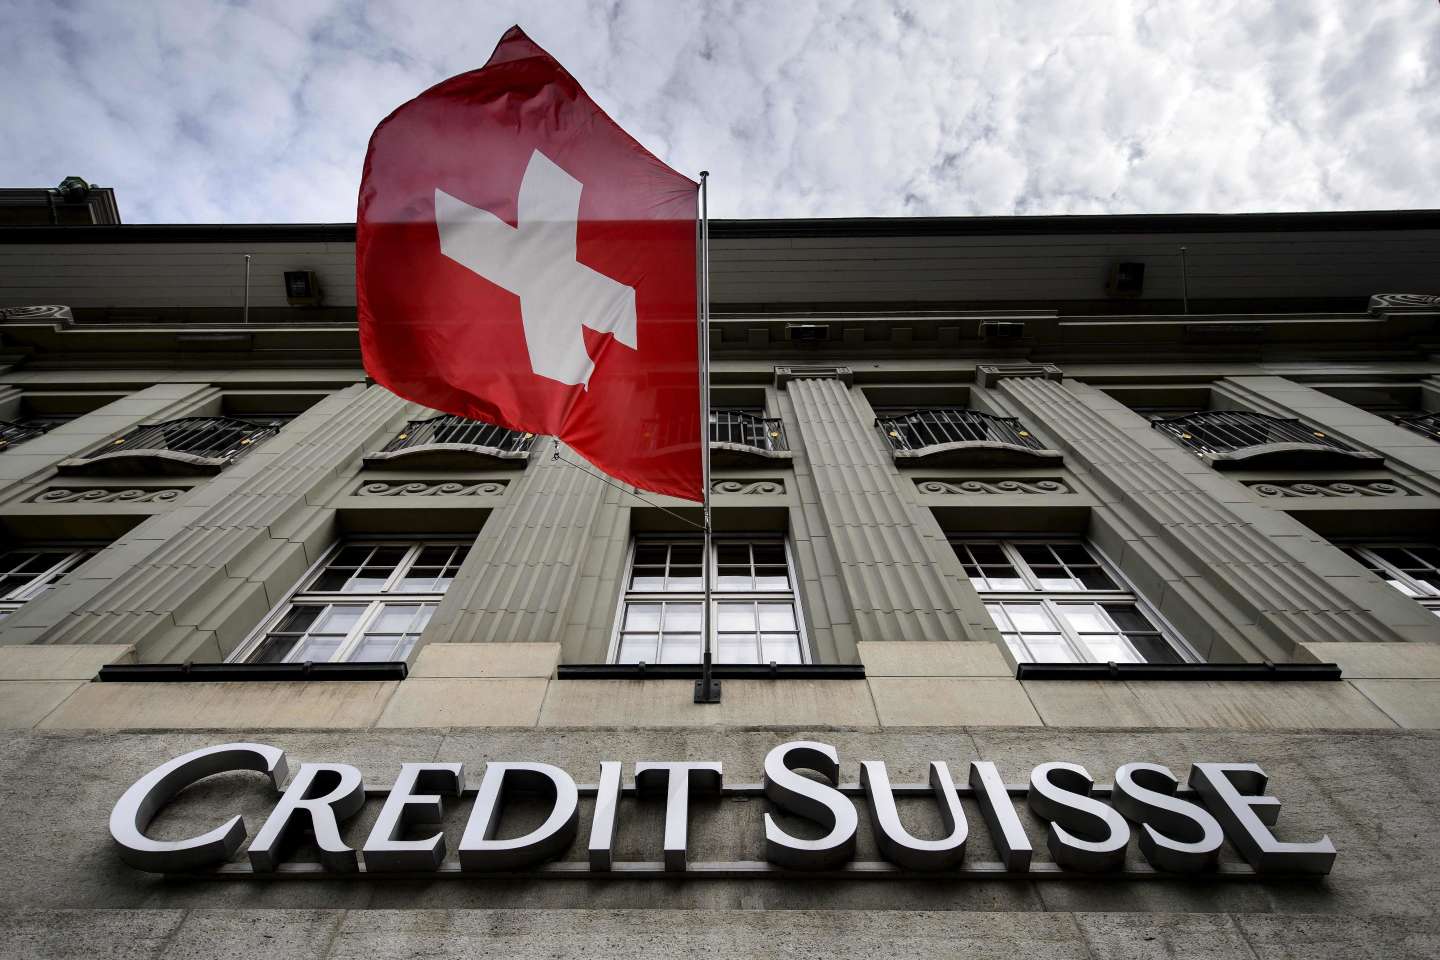 Credit Suisse suffers the worst fall in its history on the stock market and borrows 50 billion Swiss francs from the central bank